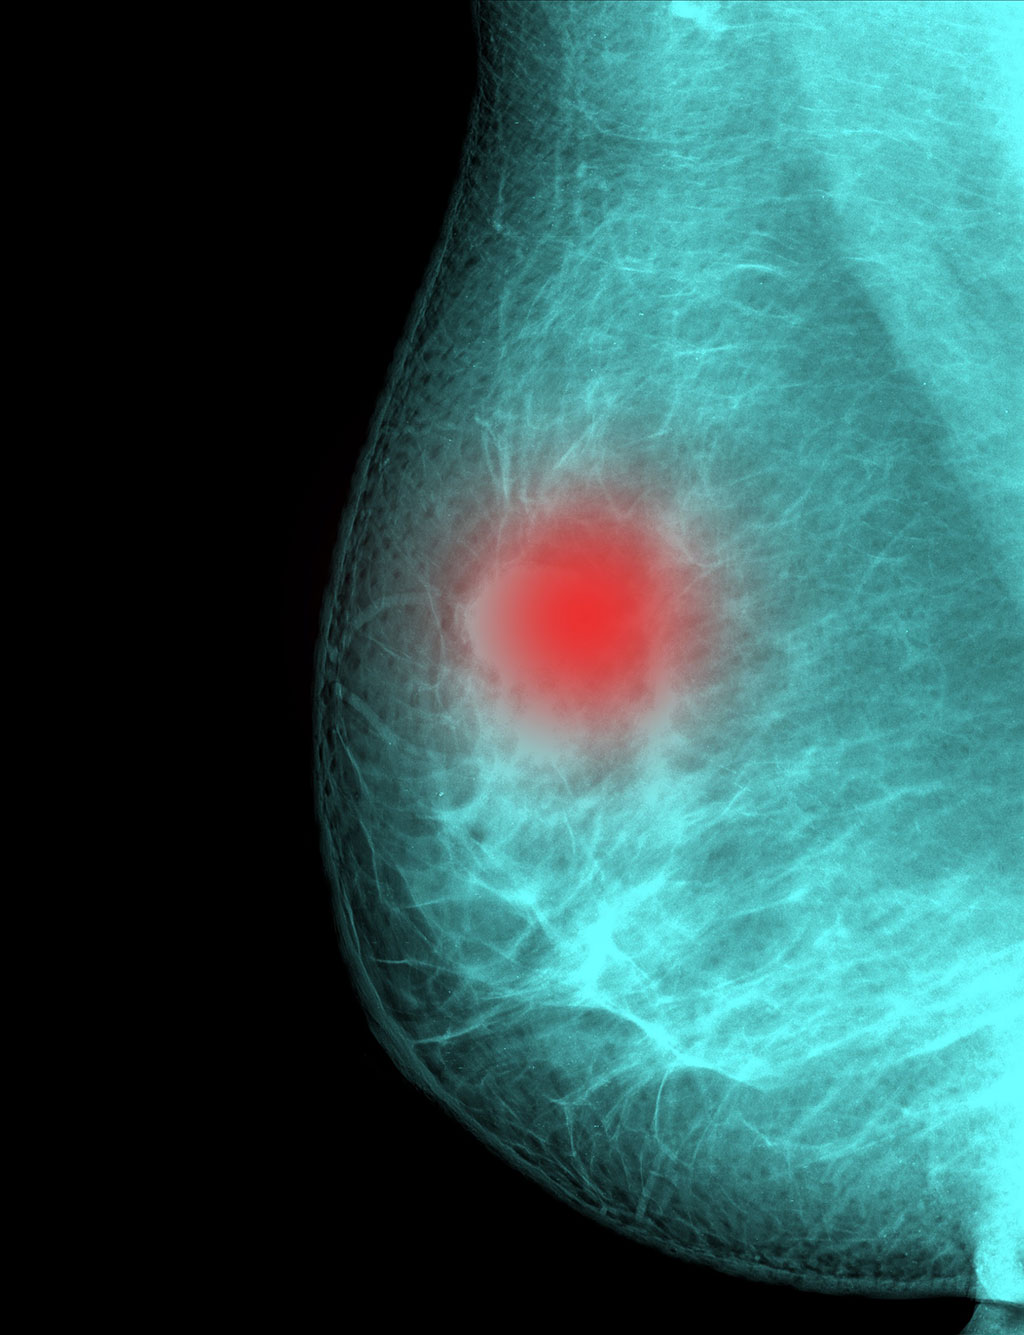 Image: AI performs comparably to human readers of mammograms (Photo courtesy of 123RF)